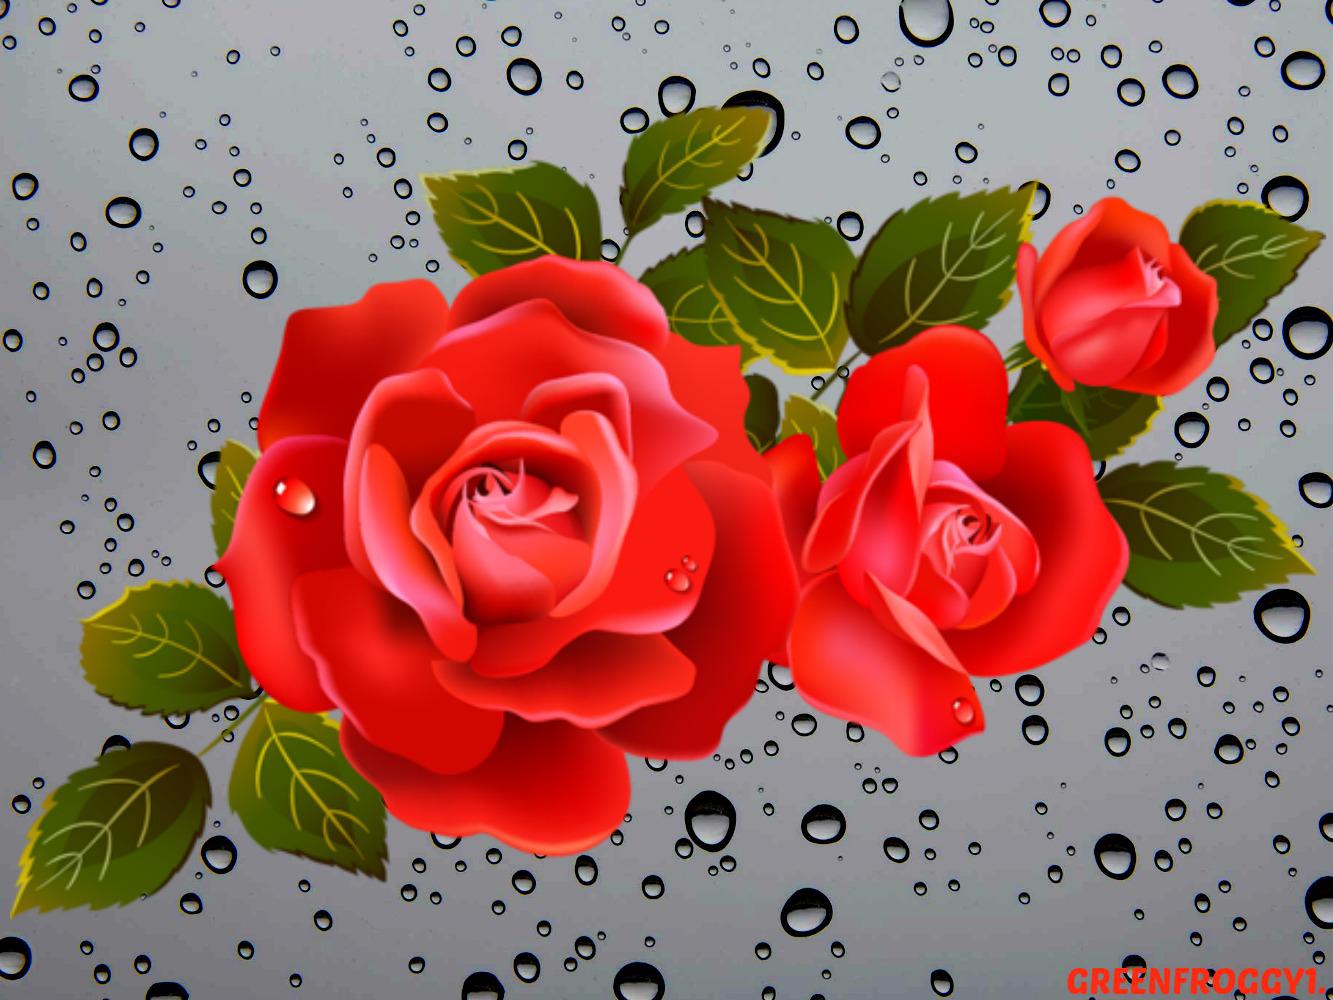 Rose with water droplets - (#165530) - High Quality and Resolution ...